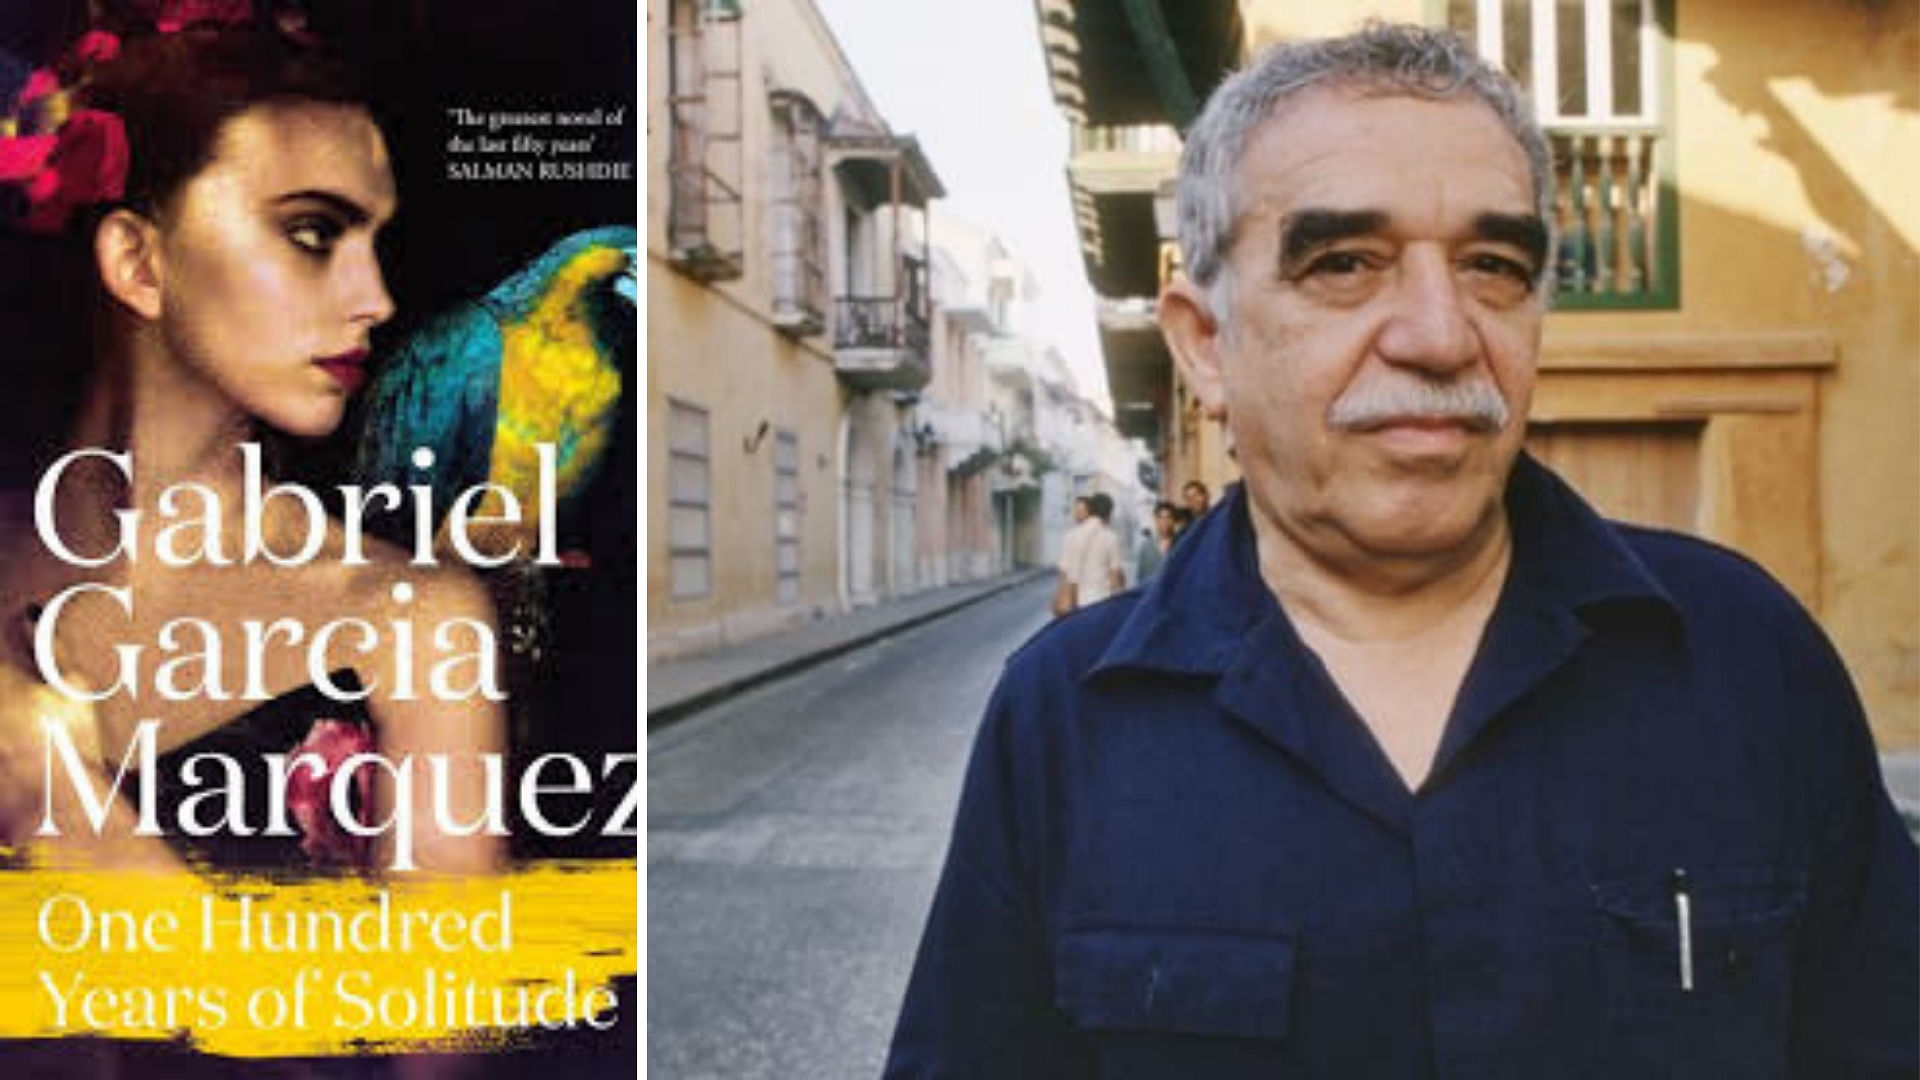 Gabriel Garcia Marquez’s novel <i>One Hundred Years of Solitude </i>will be adapted into a web series by Netflix.